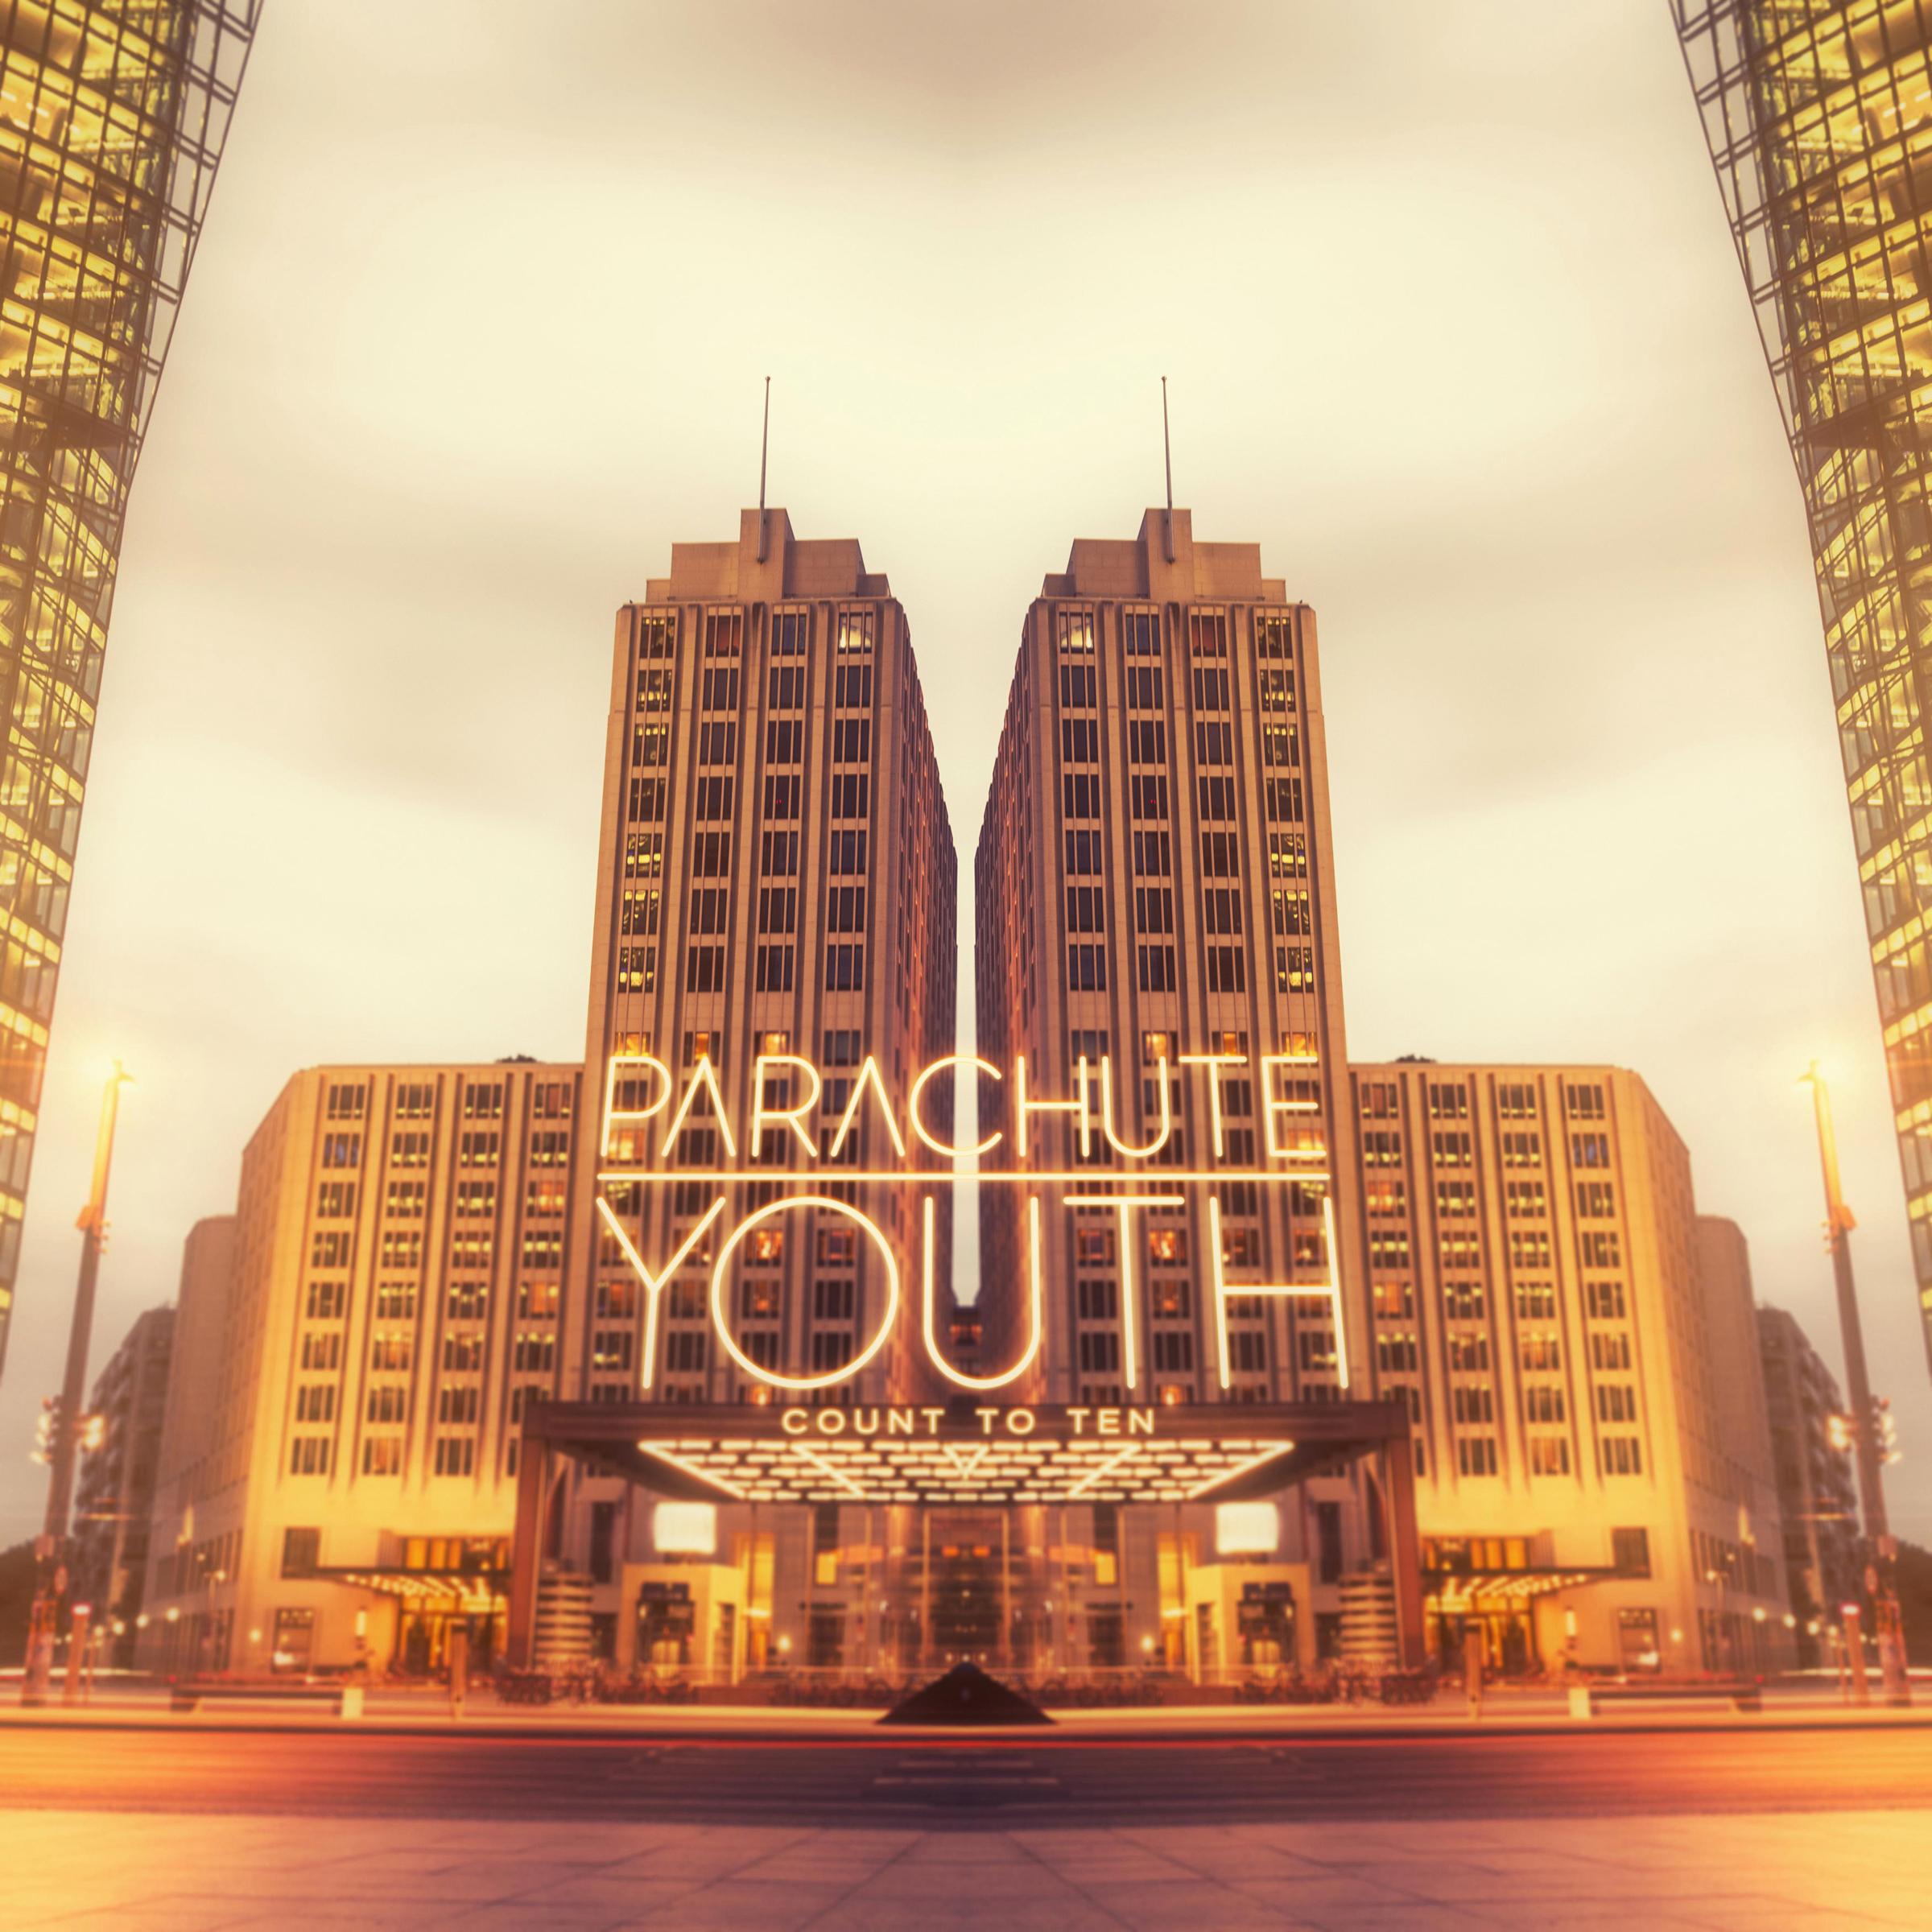 Parachute Youth - Count to Ten (Tyler Touche Remix)